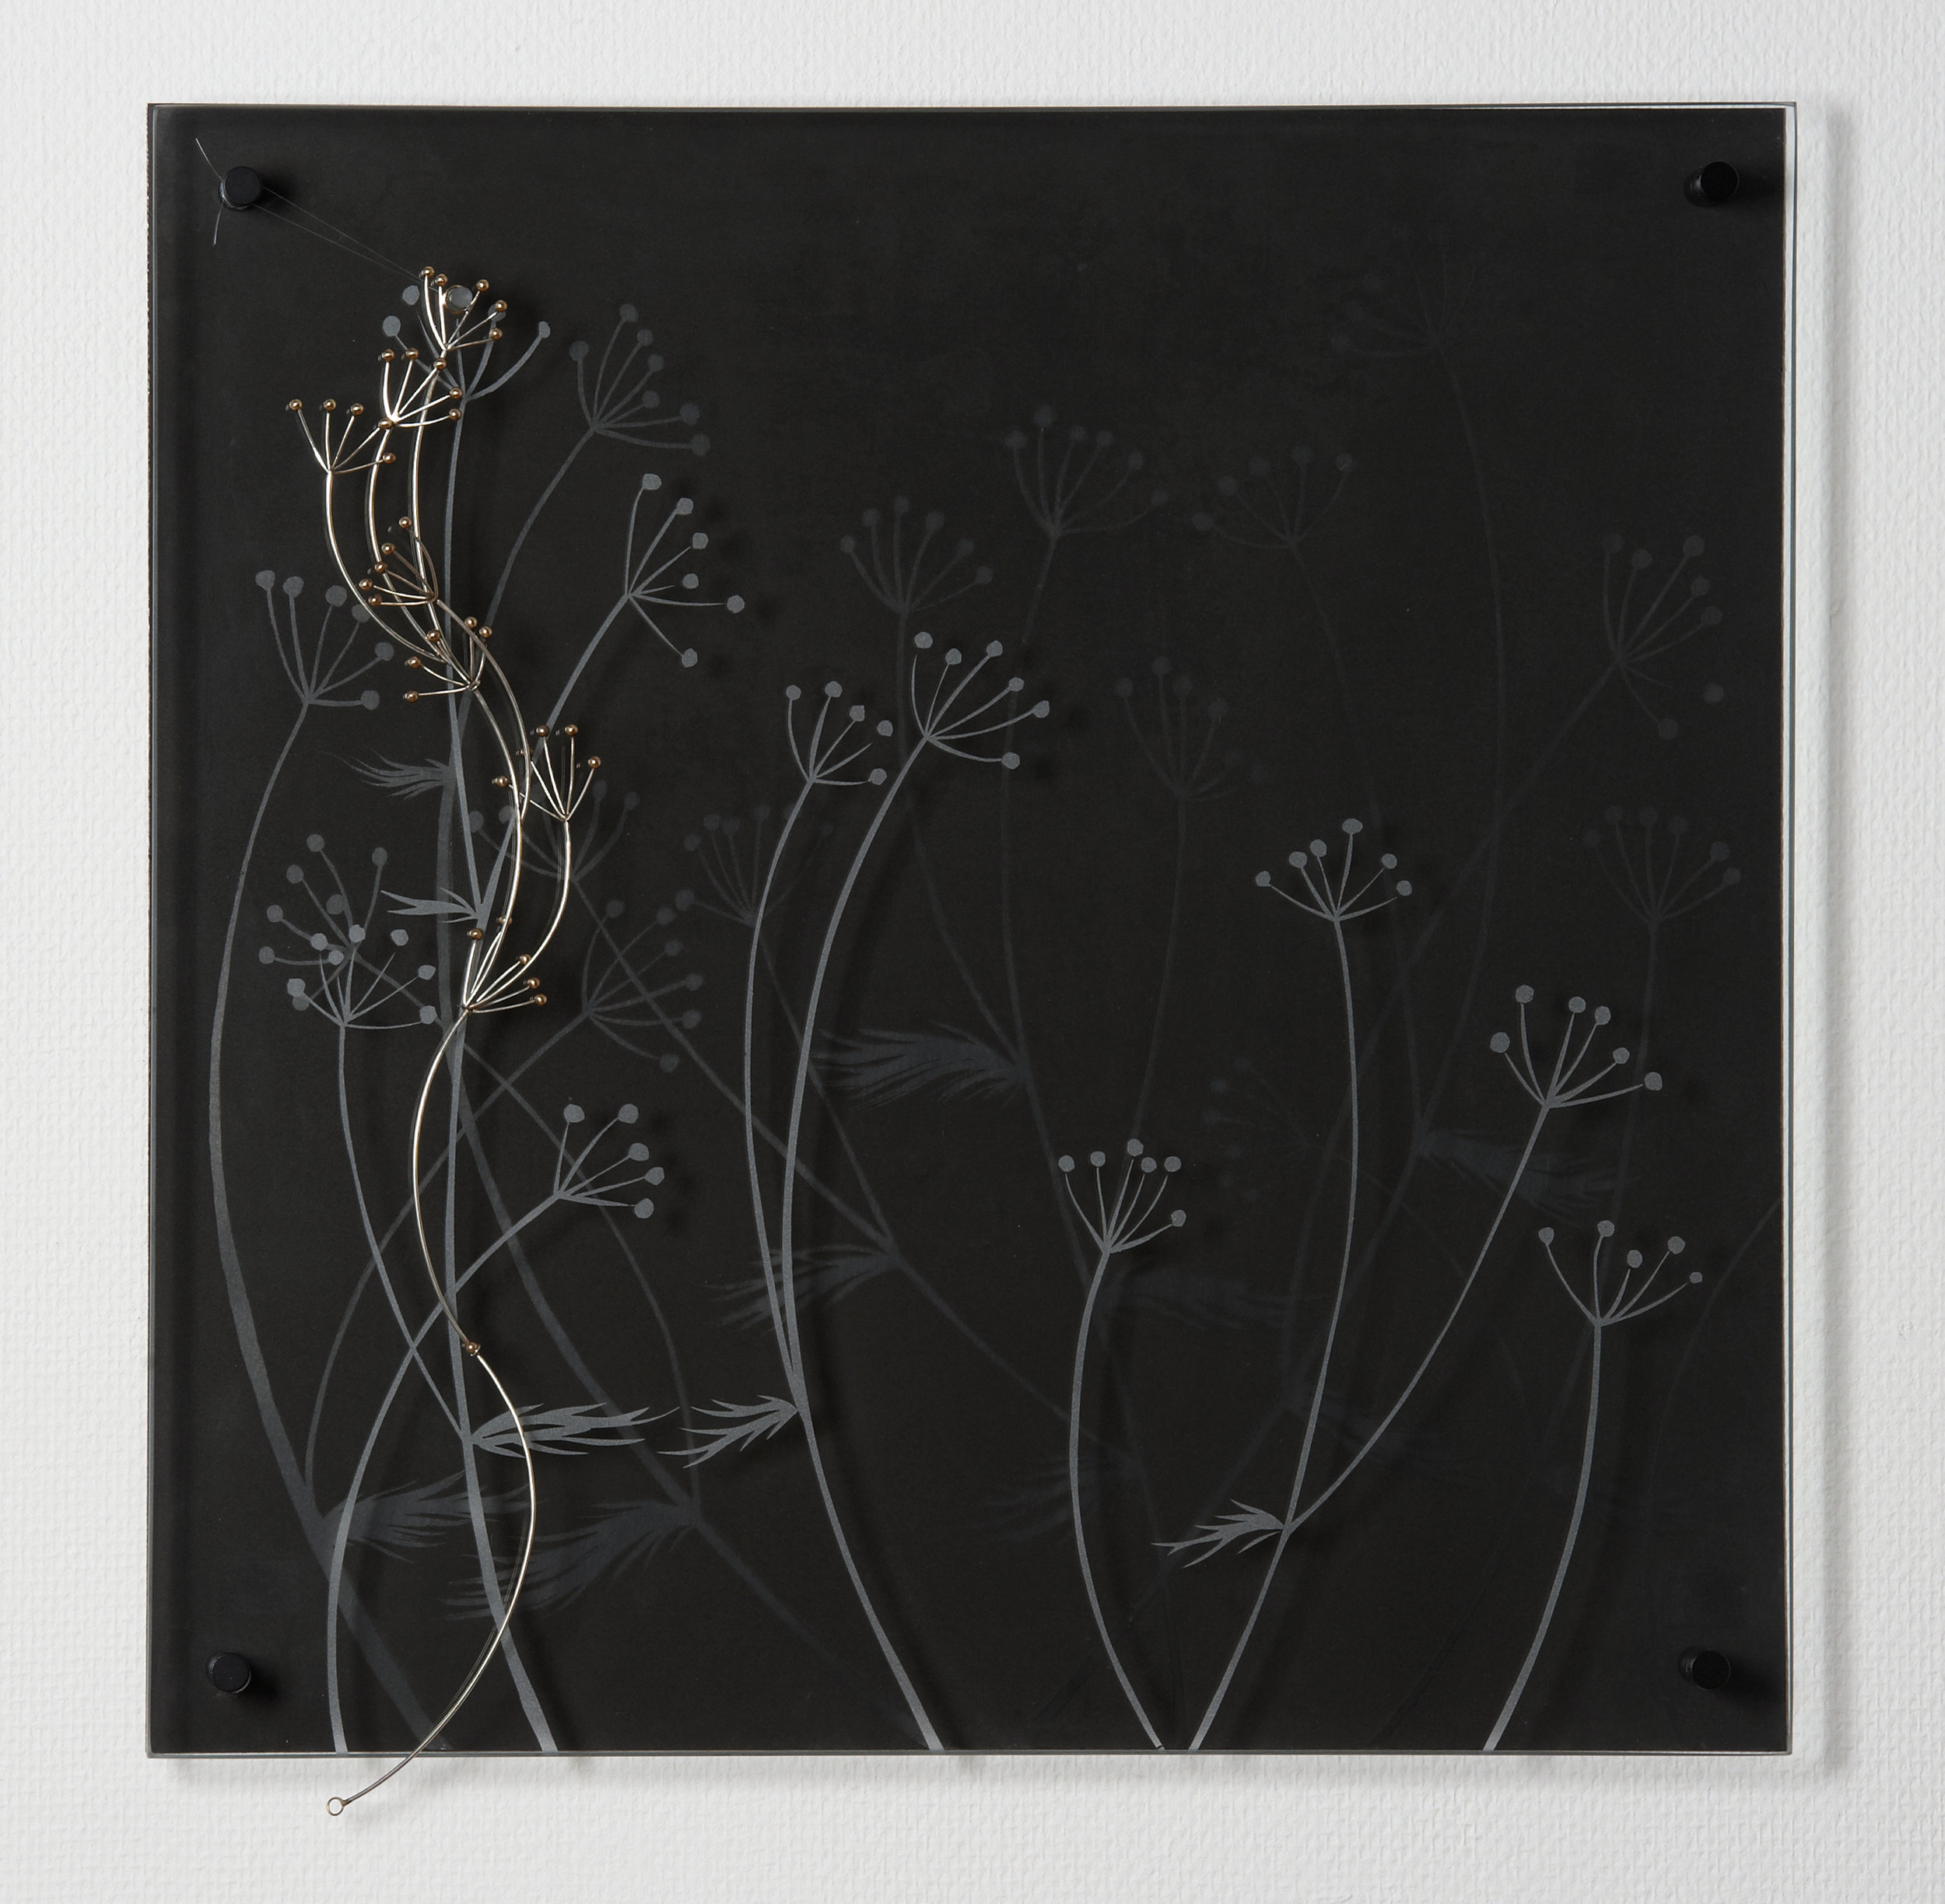 Fennel, central panel of triptych